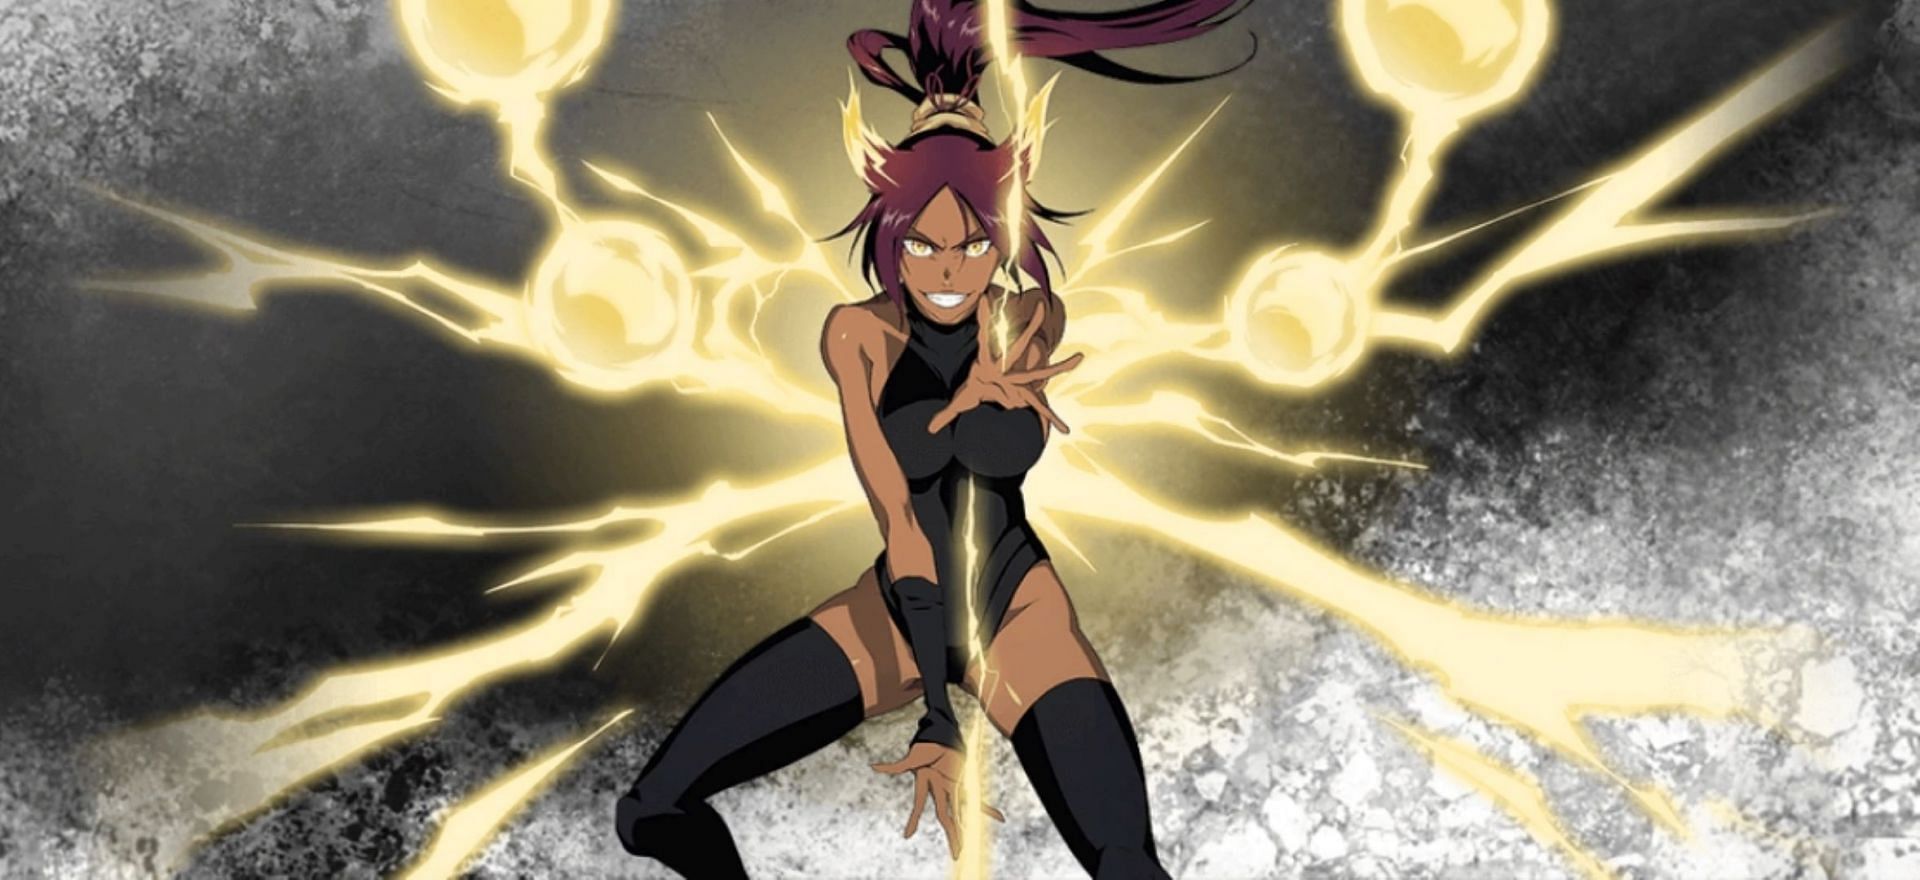 Does Yoruichi's capabilities make her a literal 'God of Thunder' in Bleach  universe? Explained